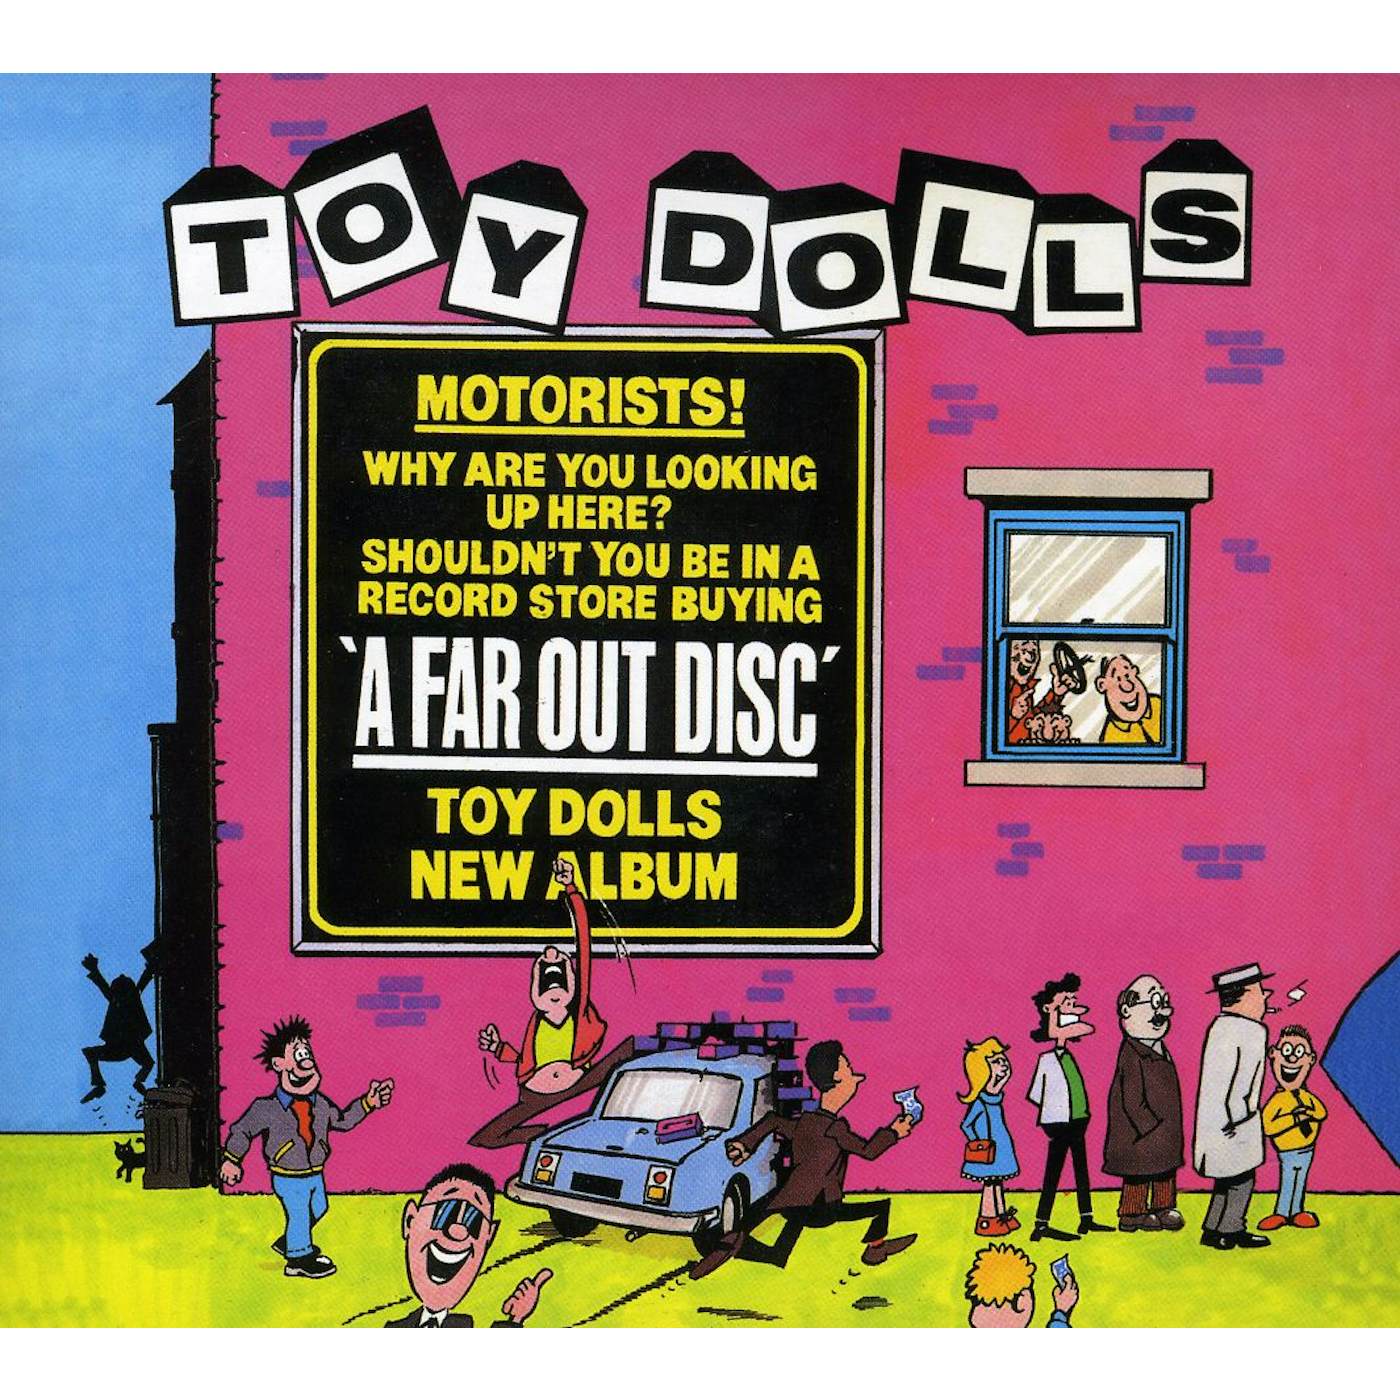 The Toy Dolls FAR OUT DISC CD